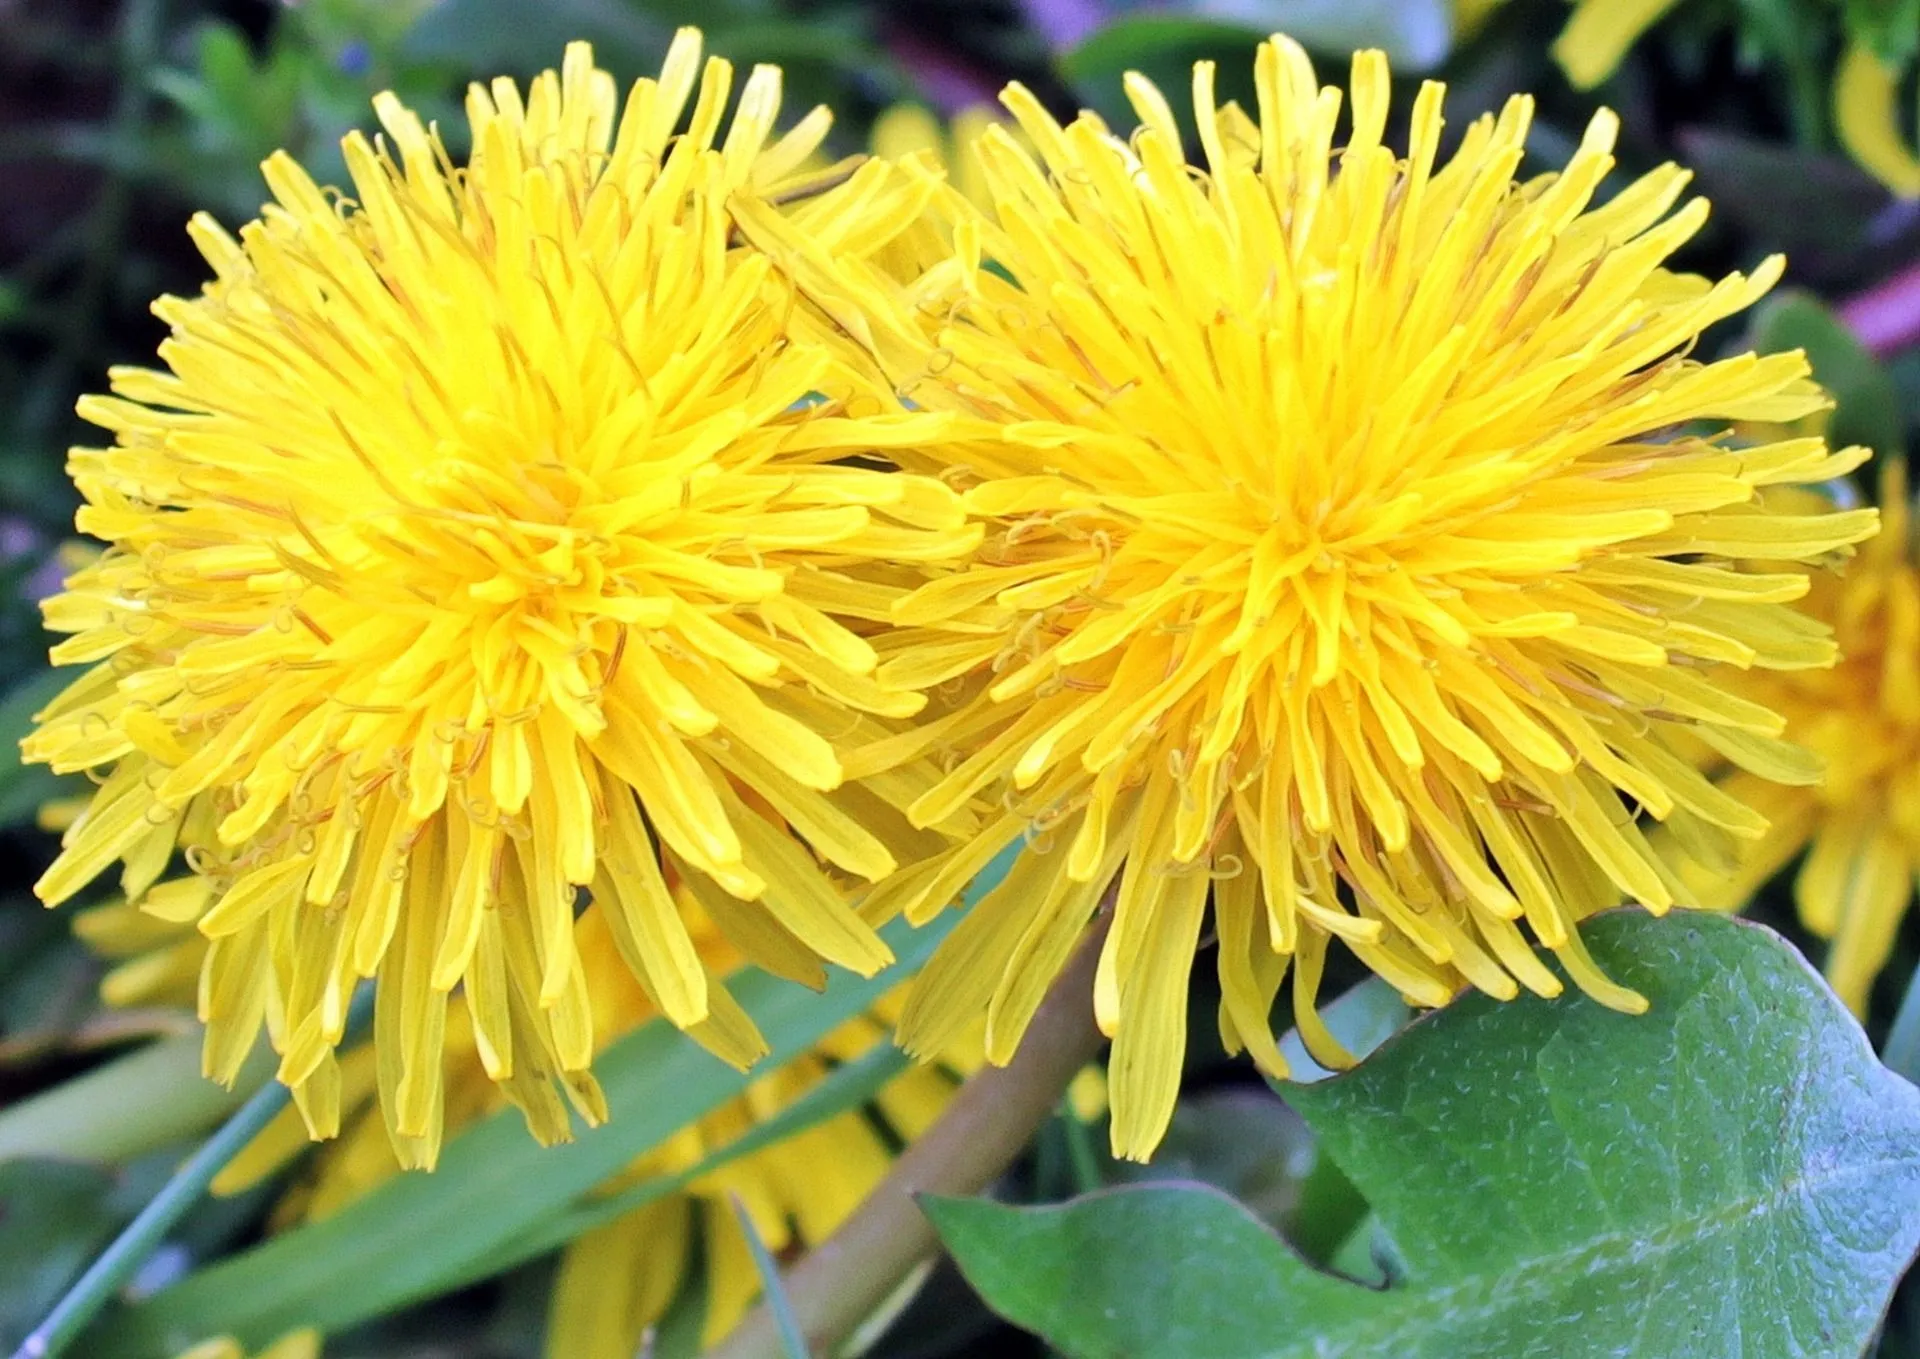 As dandelion leaves are bitter in taste, it is better if you mix the lawn leaves with some ingredients and eat them as a treat.